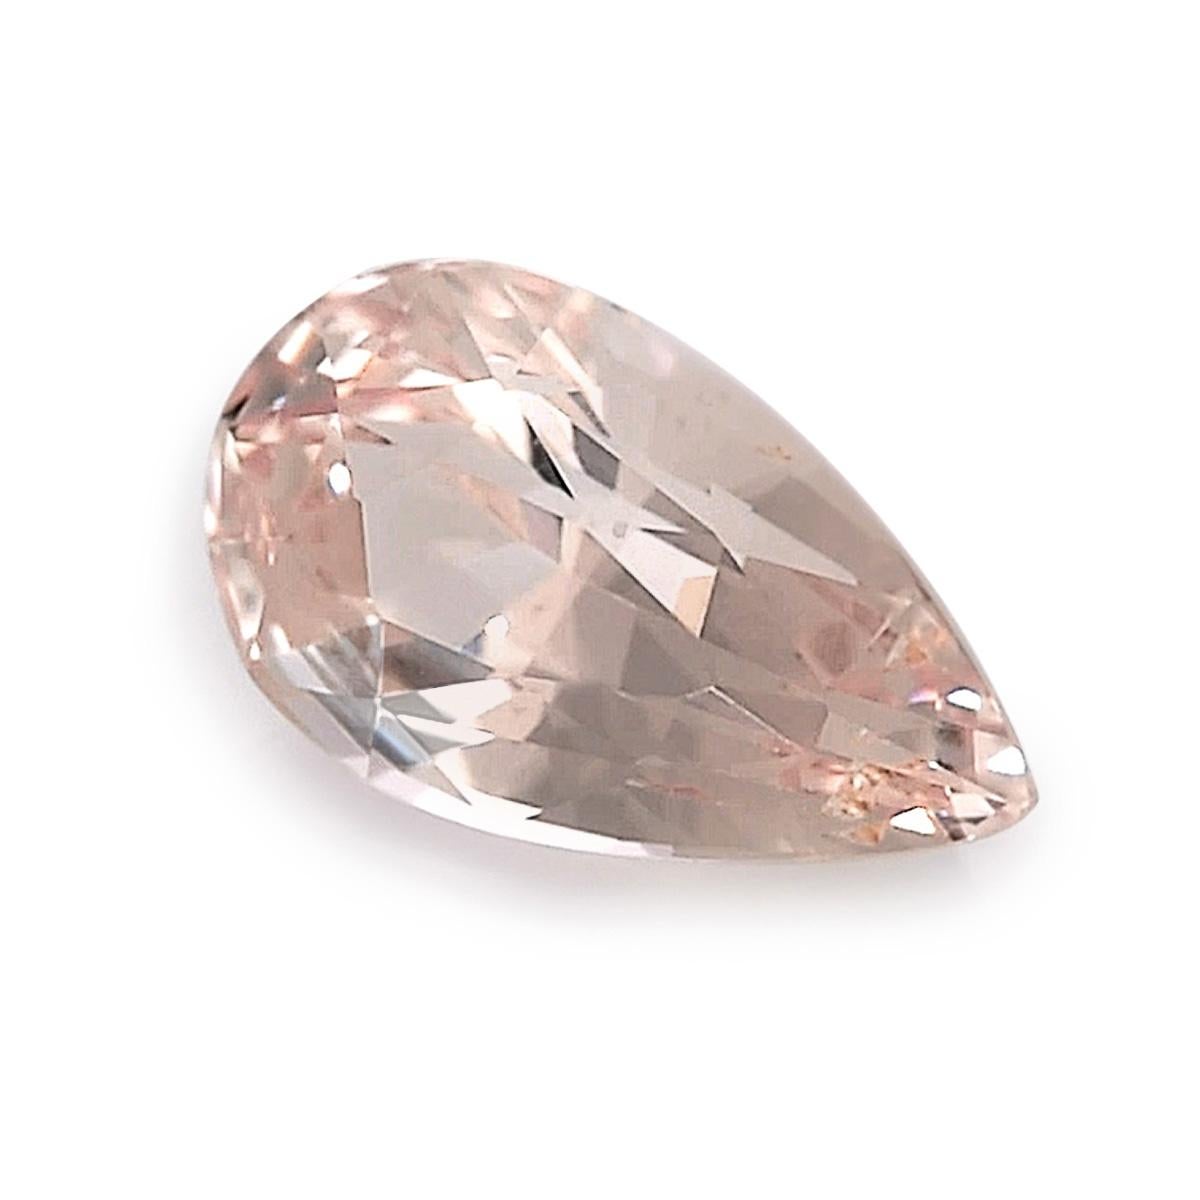 Explore the enchantment of 1.51 carats Natural Peach Sapphire, a gem that captivates with its pear shape, measuring 8.78 x 5.7 x 4.42 mm. The Brilliant/Step cut enhances its allure, showcasing a play of light and facets. Radiating a warm peach hue,